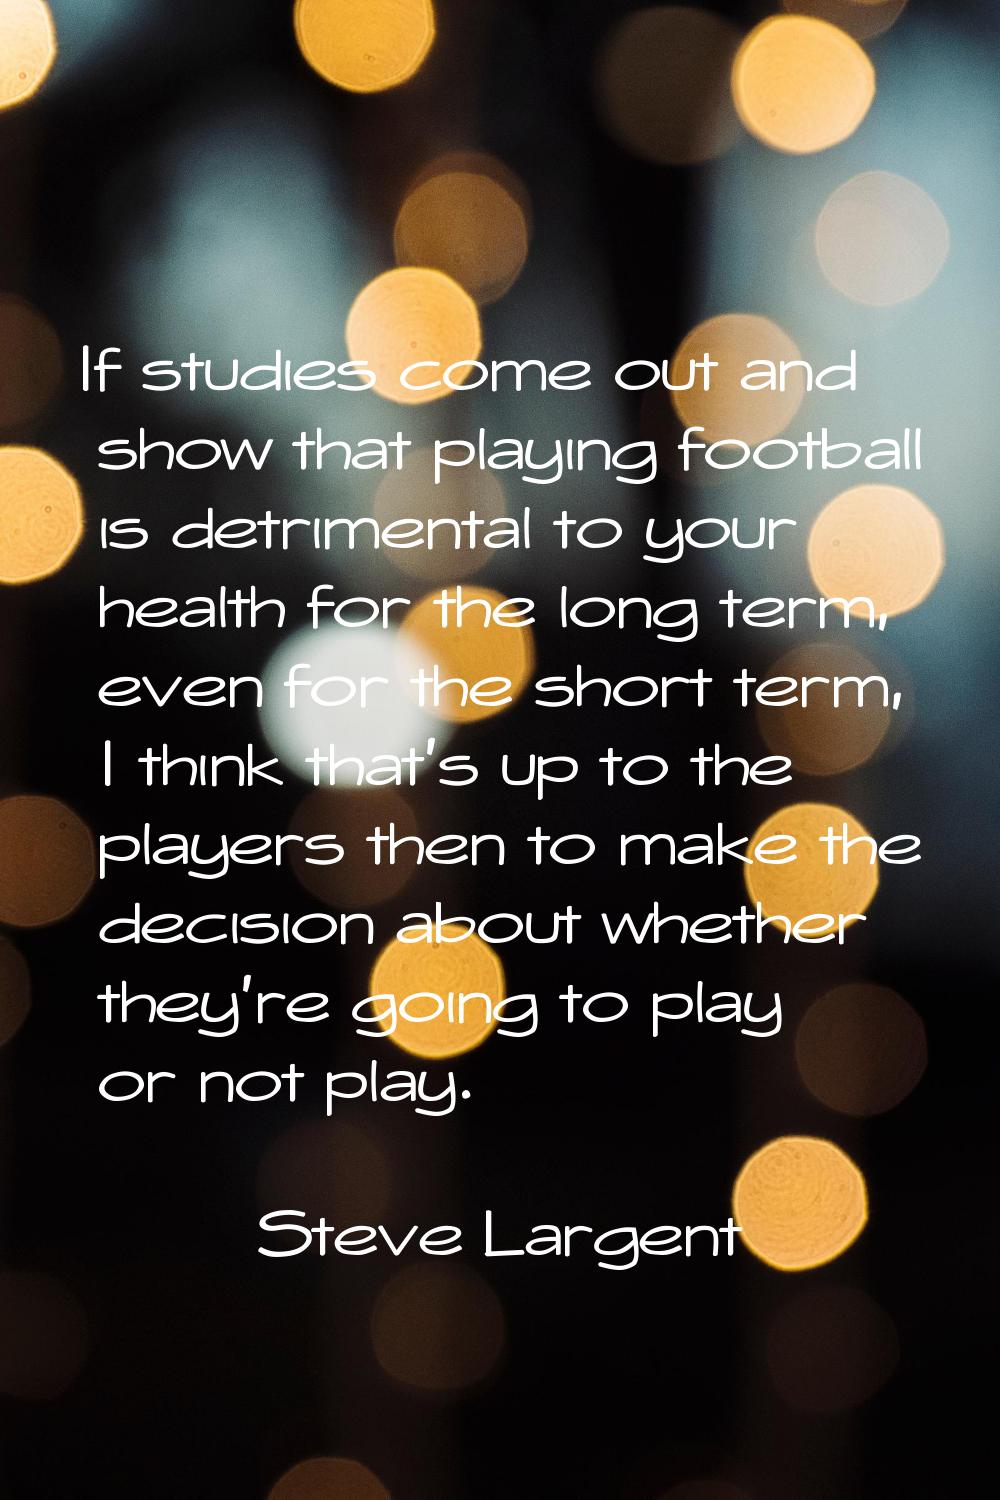 If studies come out and show that playing football is detrimental to your health for the long term,